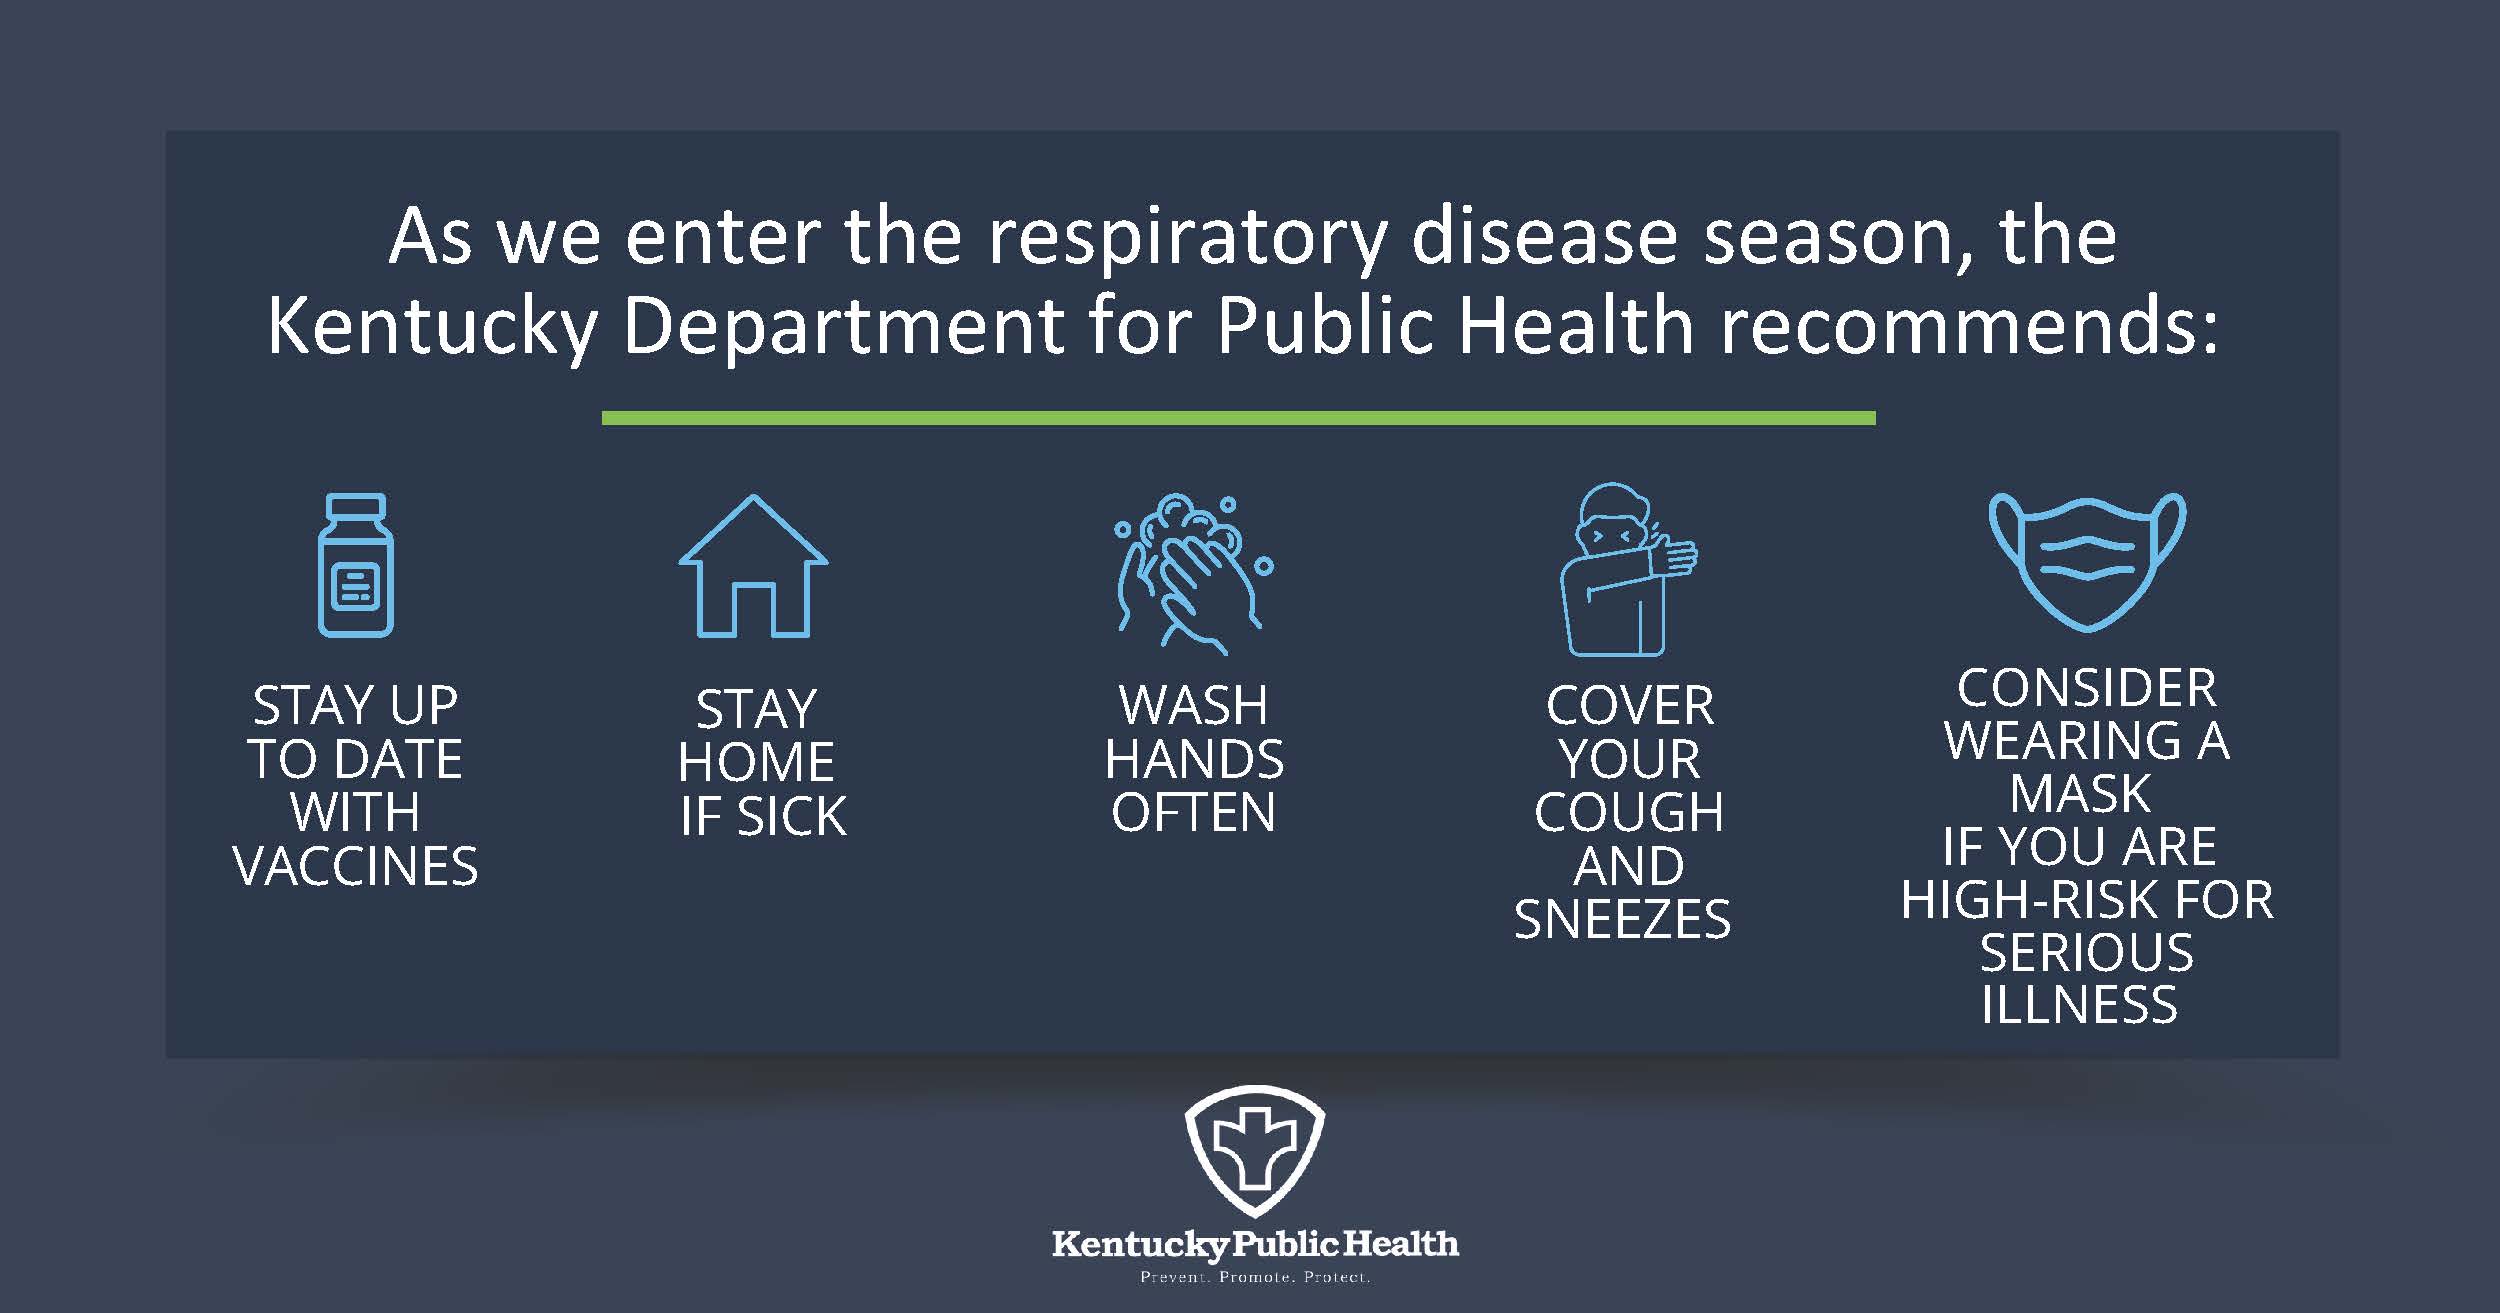 Respiratory Disease recommendations.